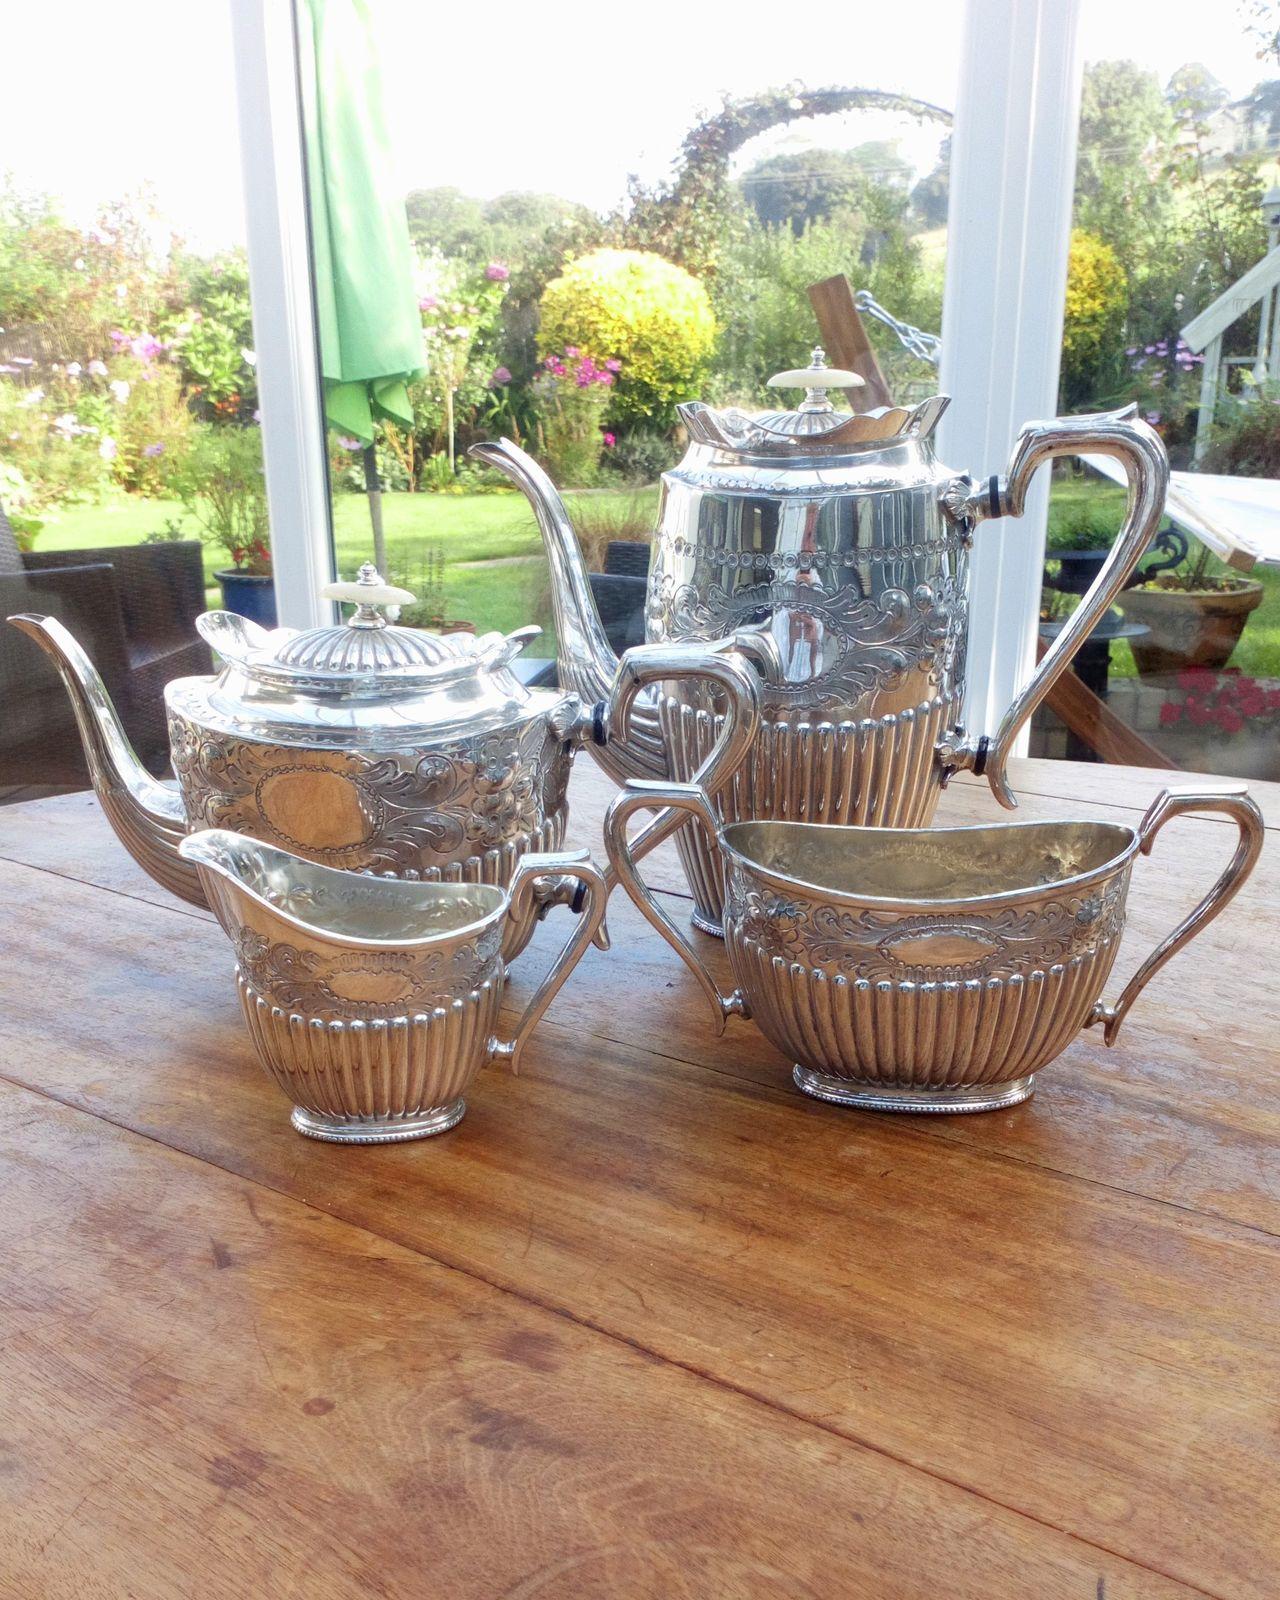 An antique late Victorian silver plated four piece tea and coffee set or service new oval shape reeded and engraved bodies teapot inscribed to one side 1st prize presented by J Ashworths and sons ltd  rodsham Bridge stamped on the base GM&S 770 for George Maclaurin and Co of Sheffield circa 1900.